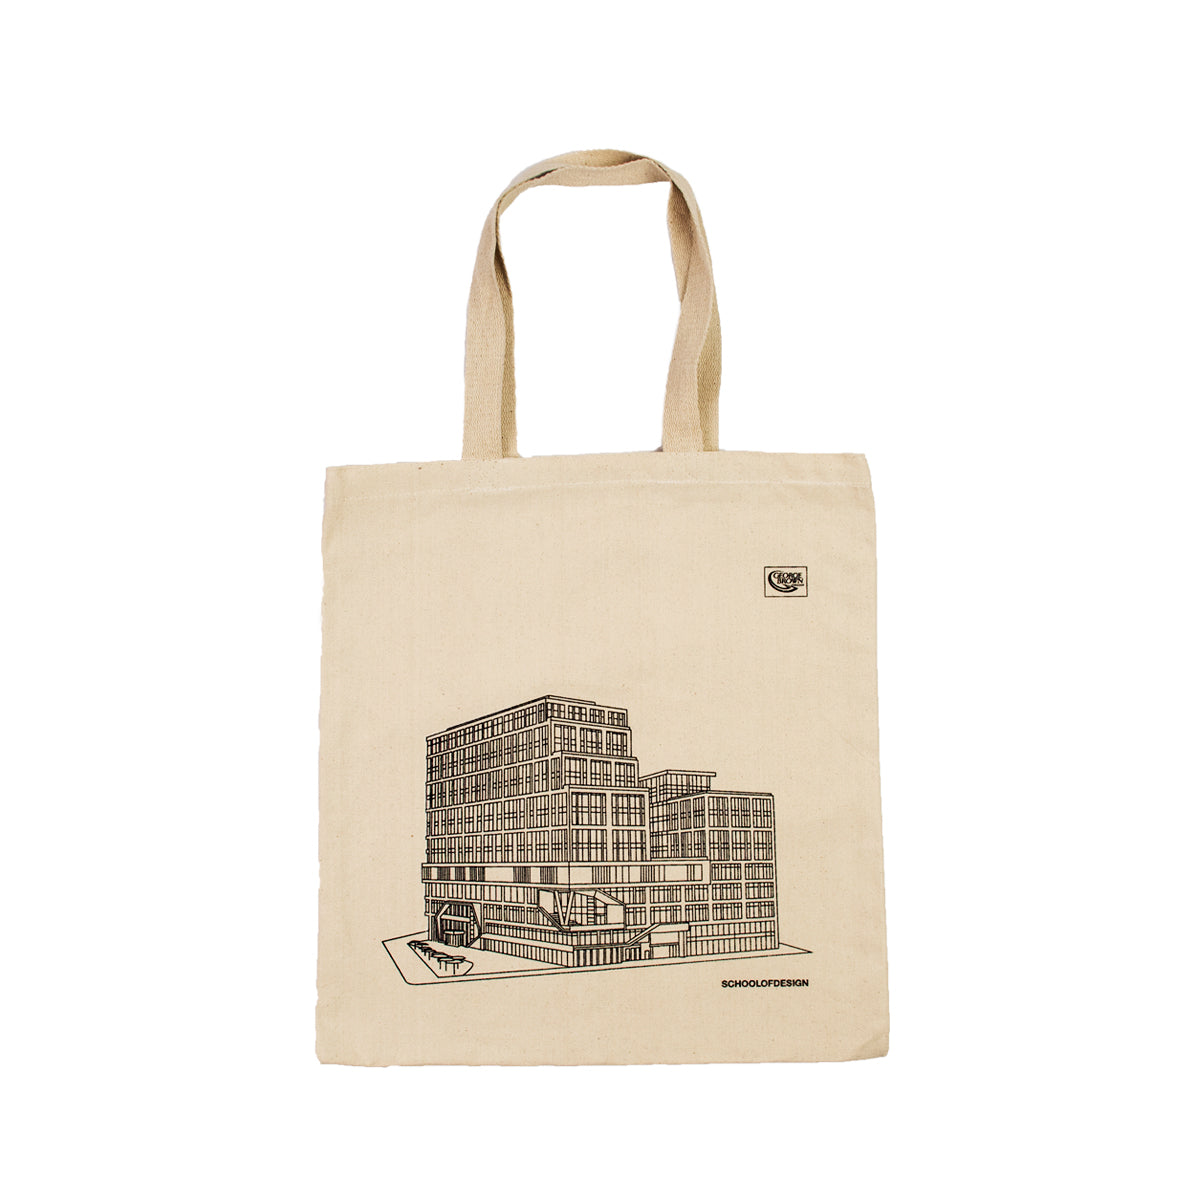 14" x 15" 100% cotton beige tote bag featuring an illustration of the Daniels Building, School of Design